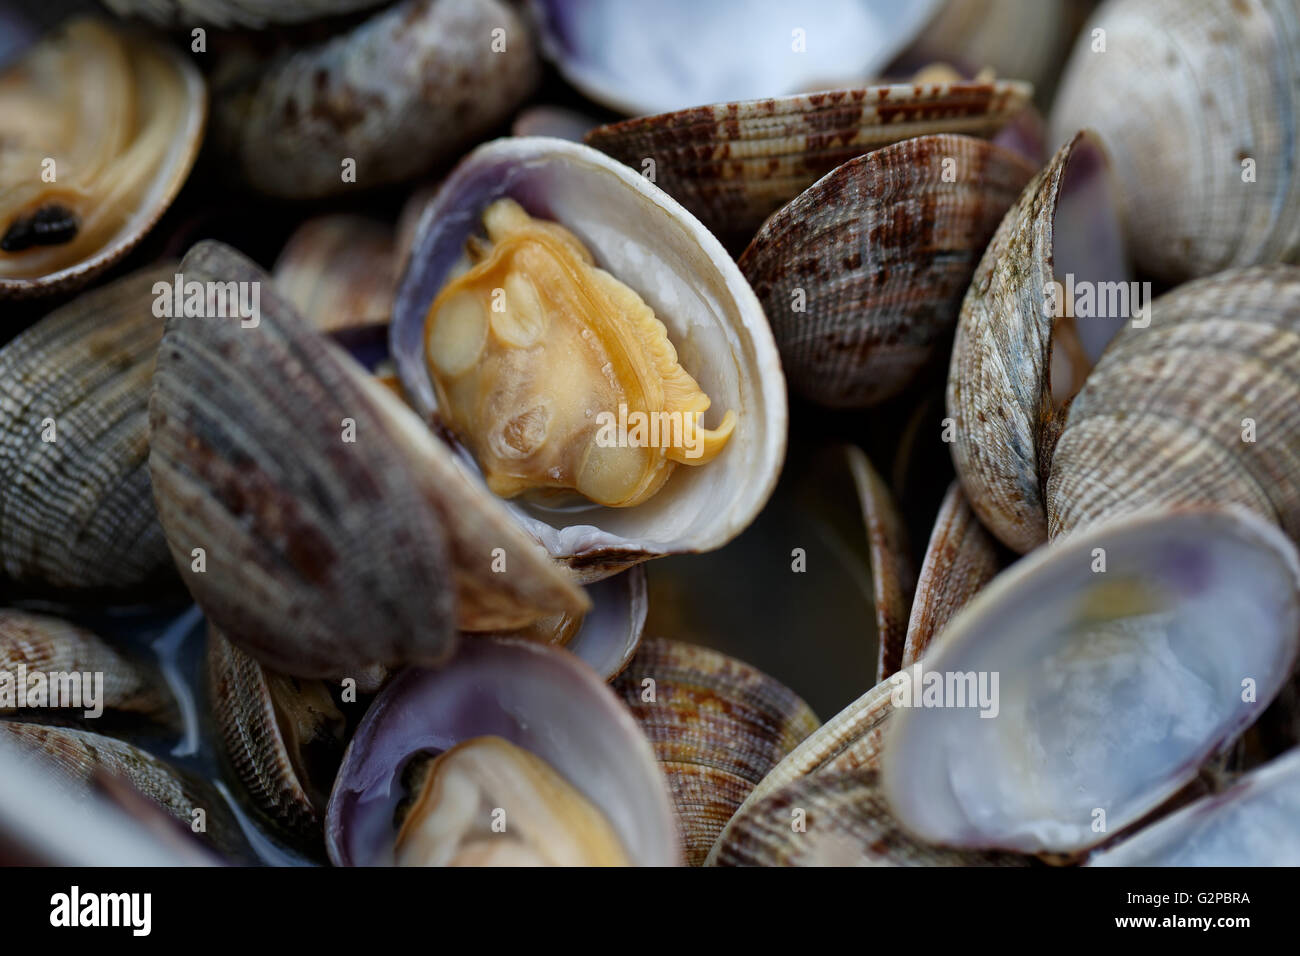 Serving of warm and fresh cooked mussels Stock Photo